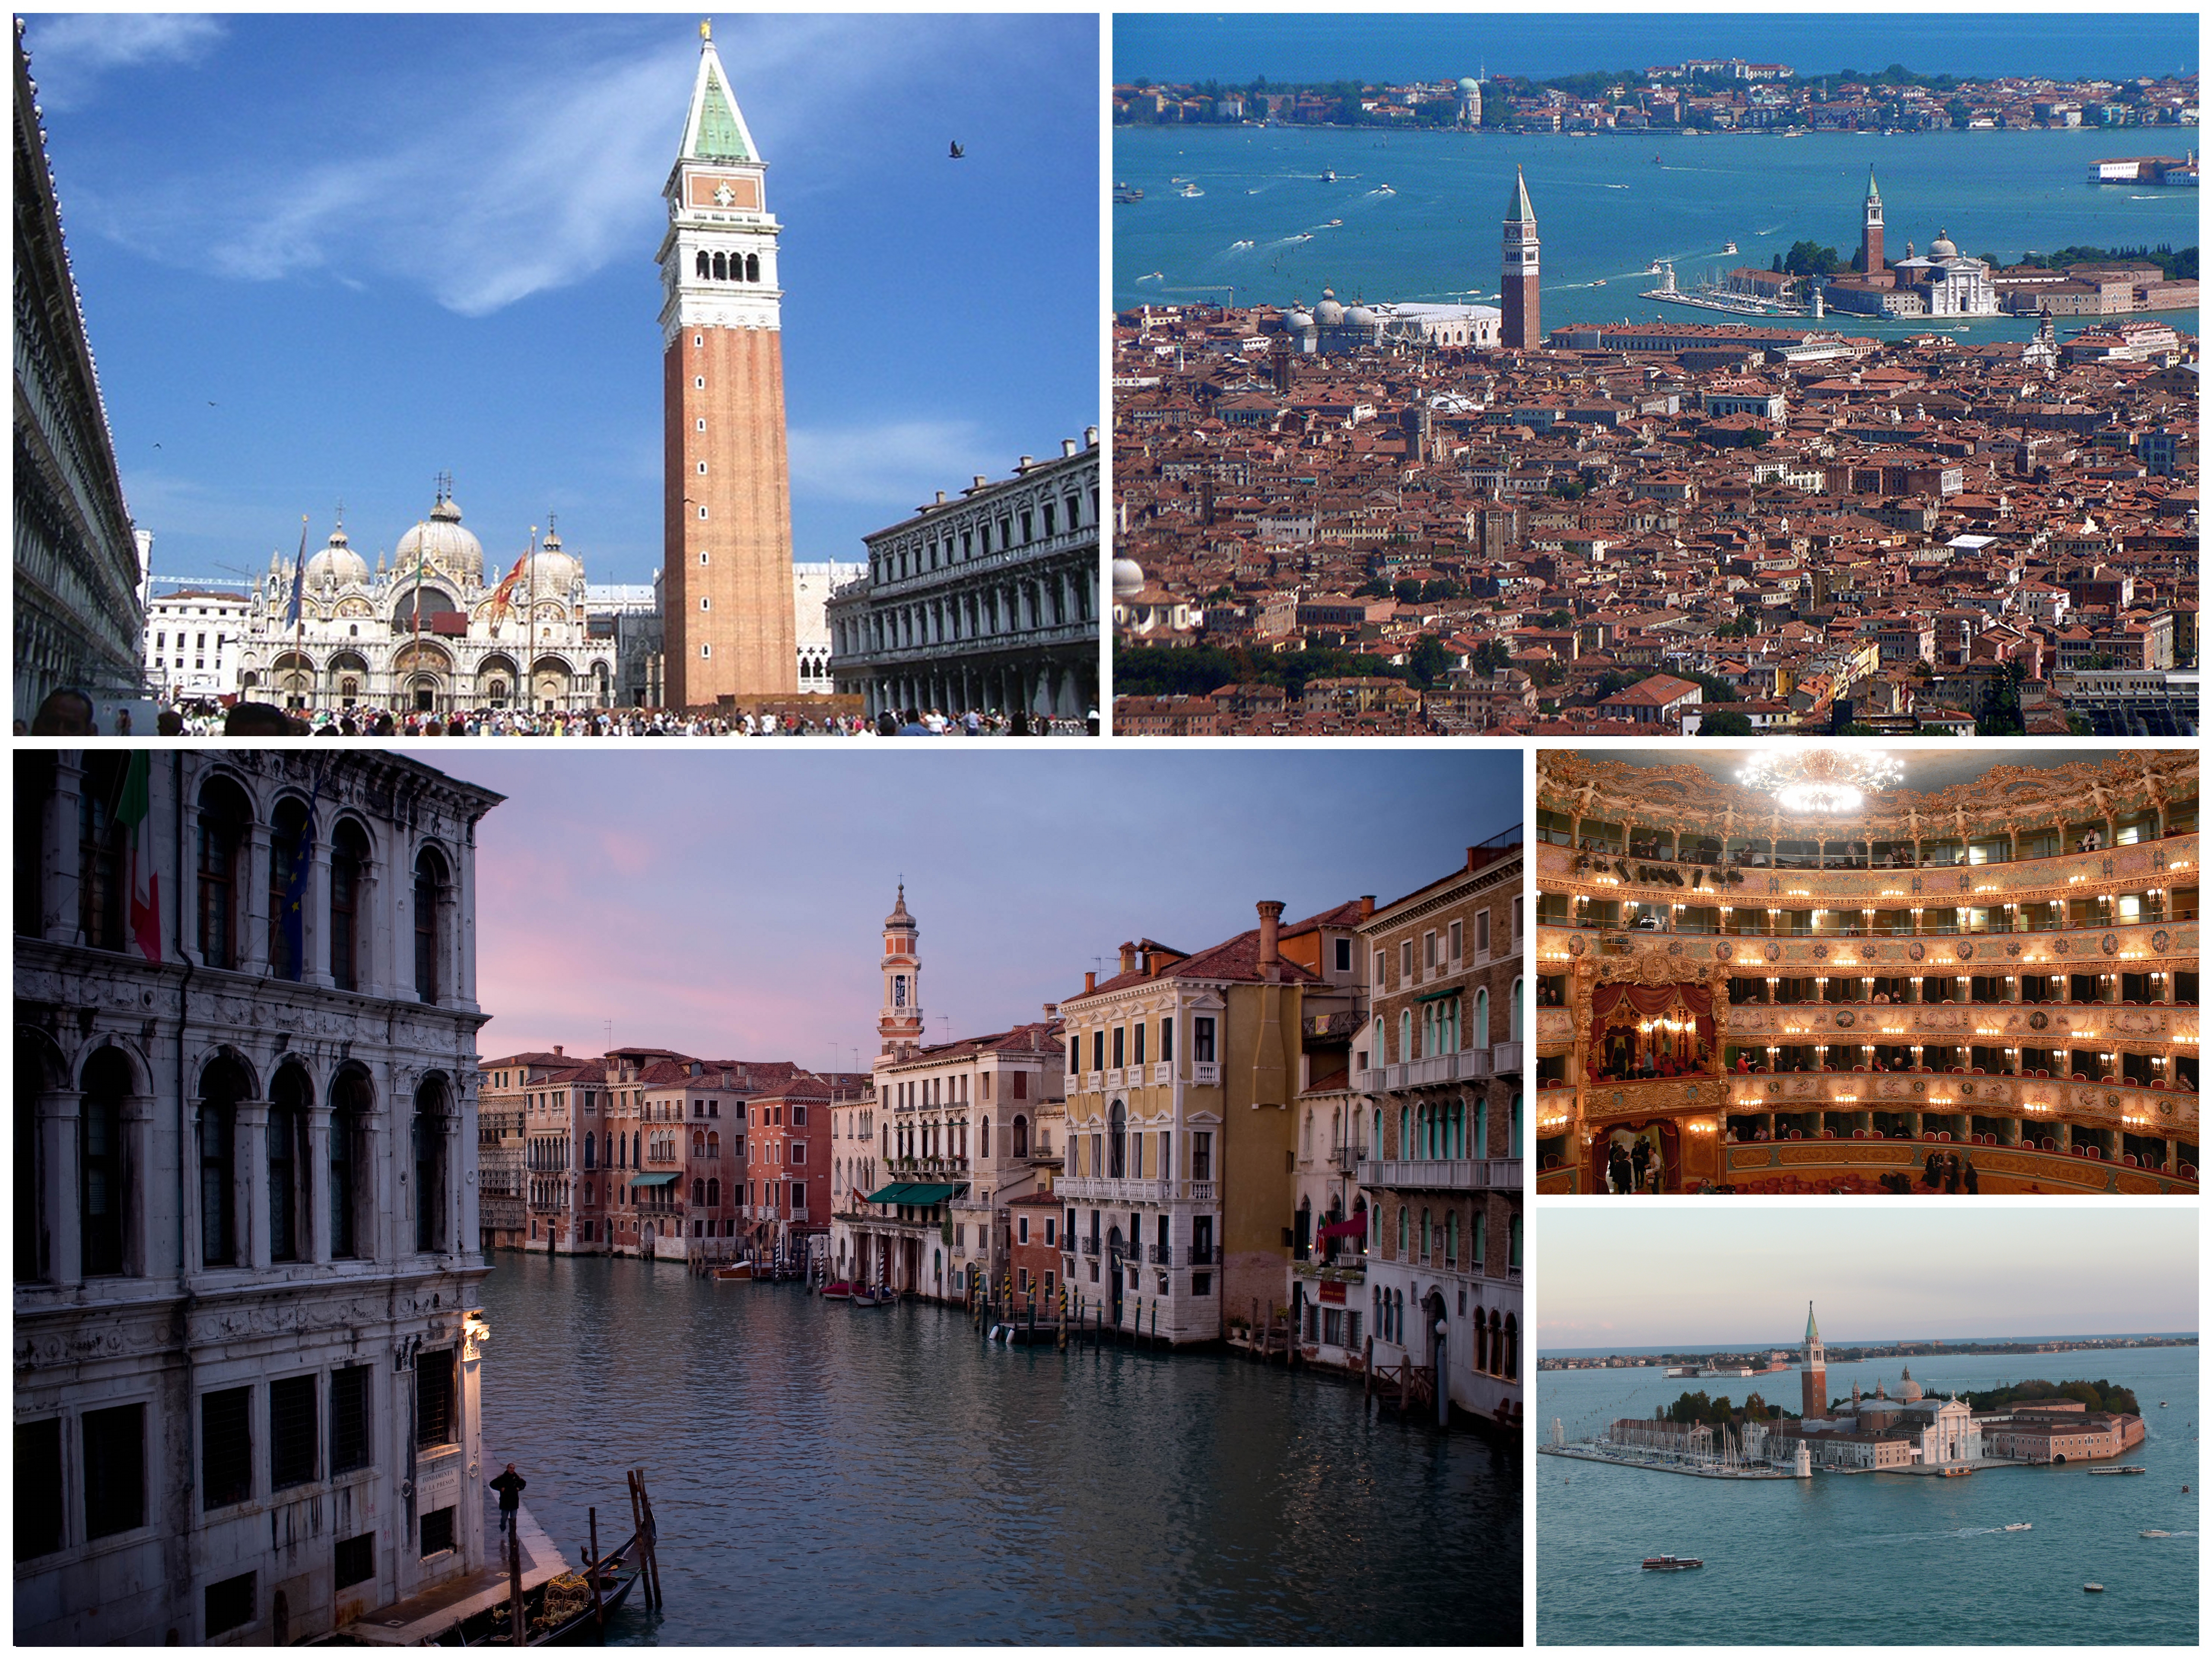 Venice collage from Wikipedia